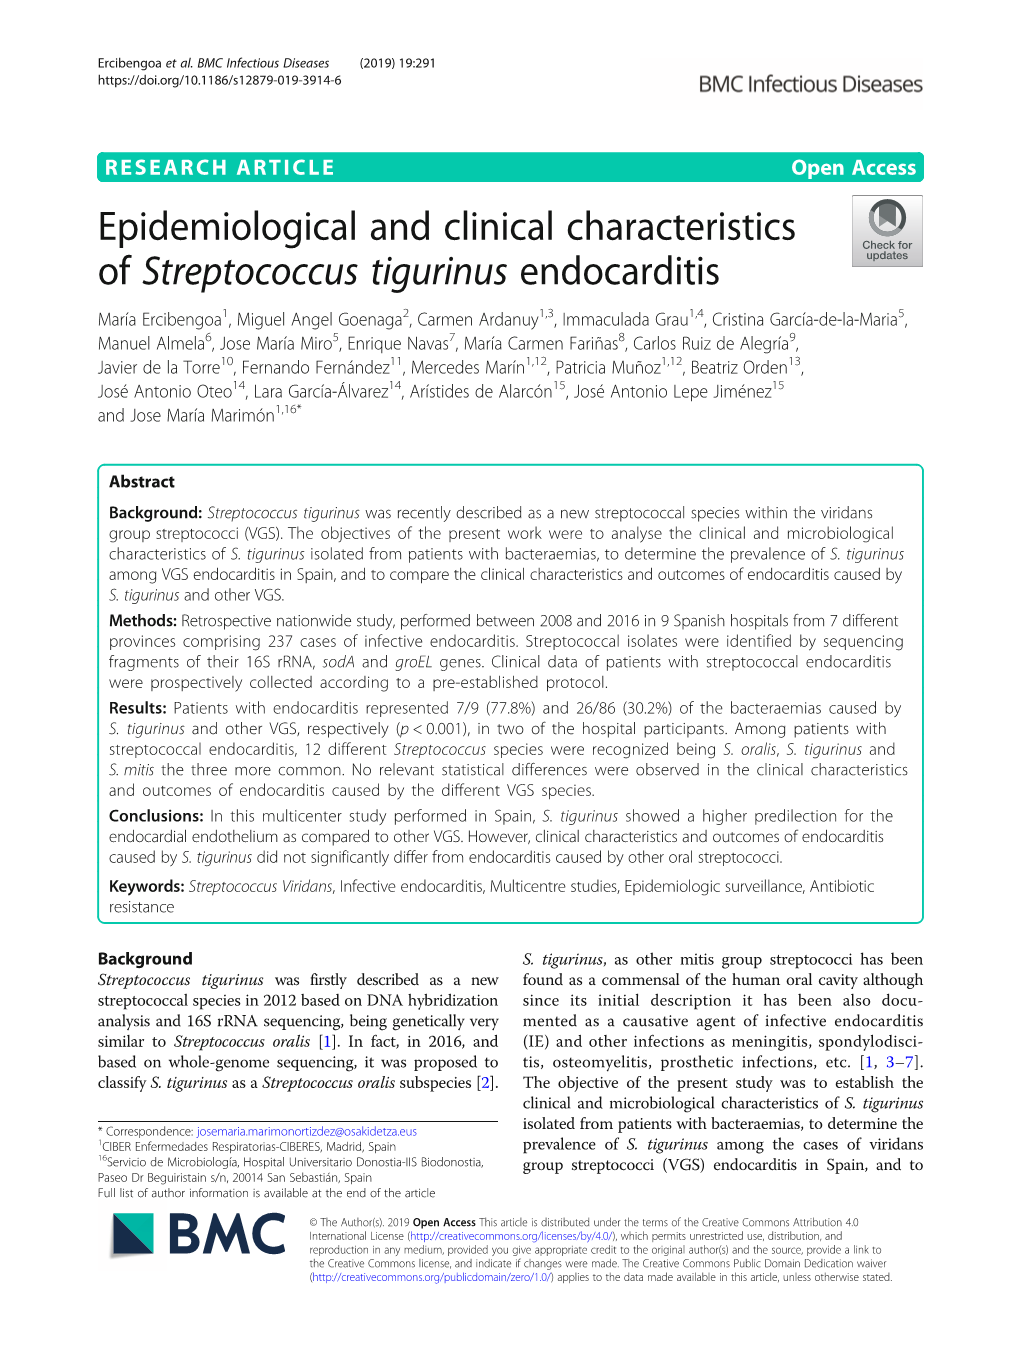 Epidemiological and Clinical Characteristics of Streptococcus